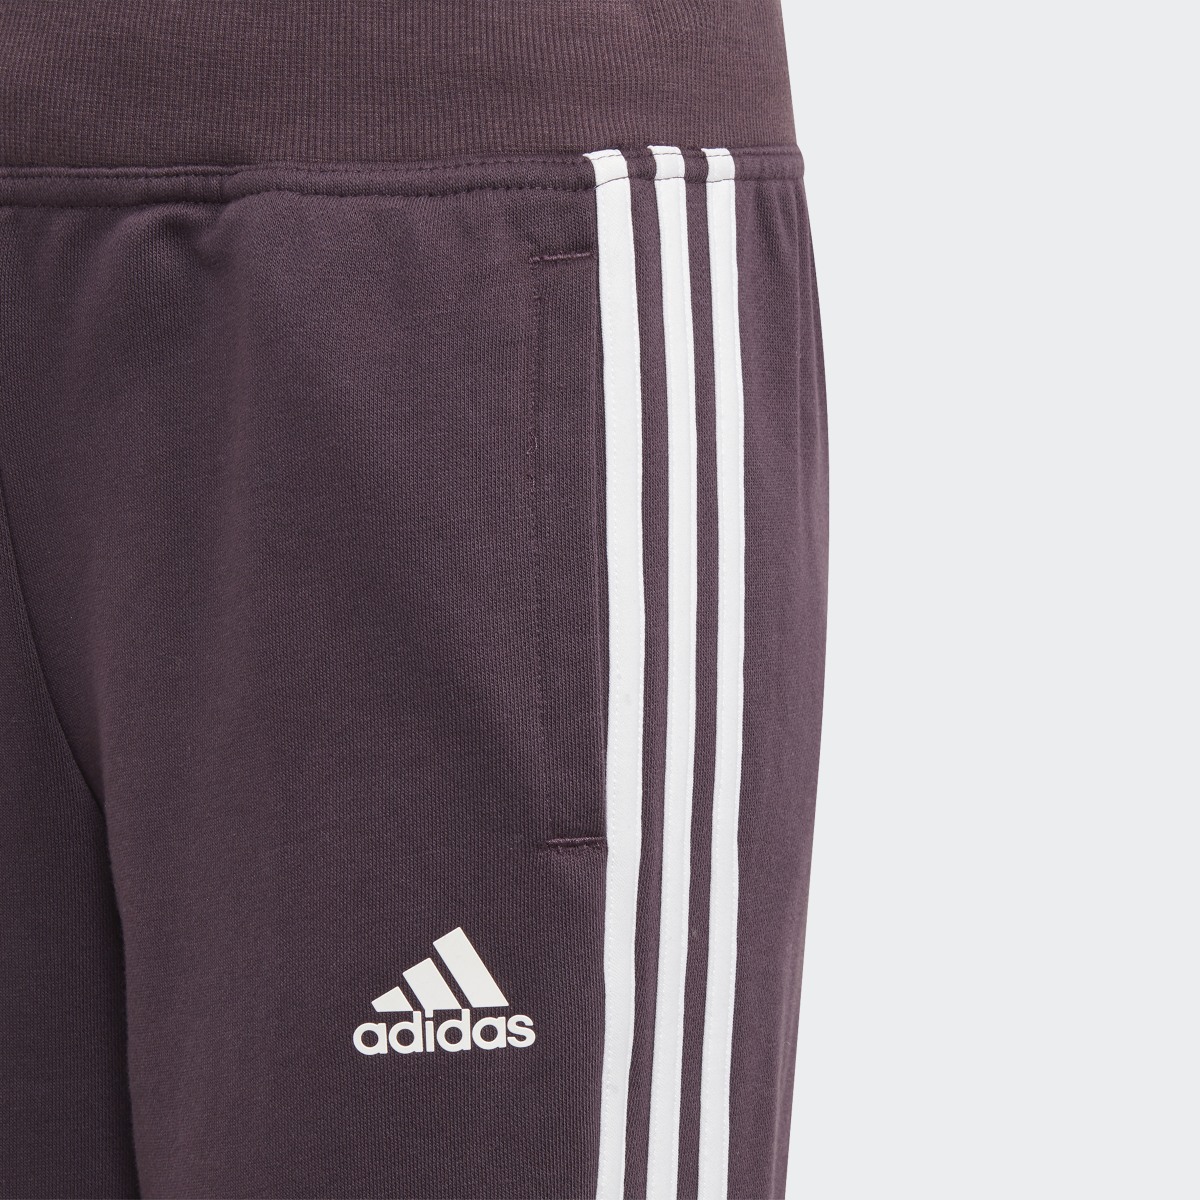 Adidas Hooded Cotton Track Suit. 8